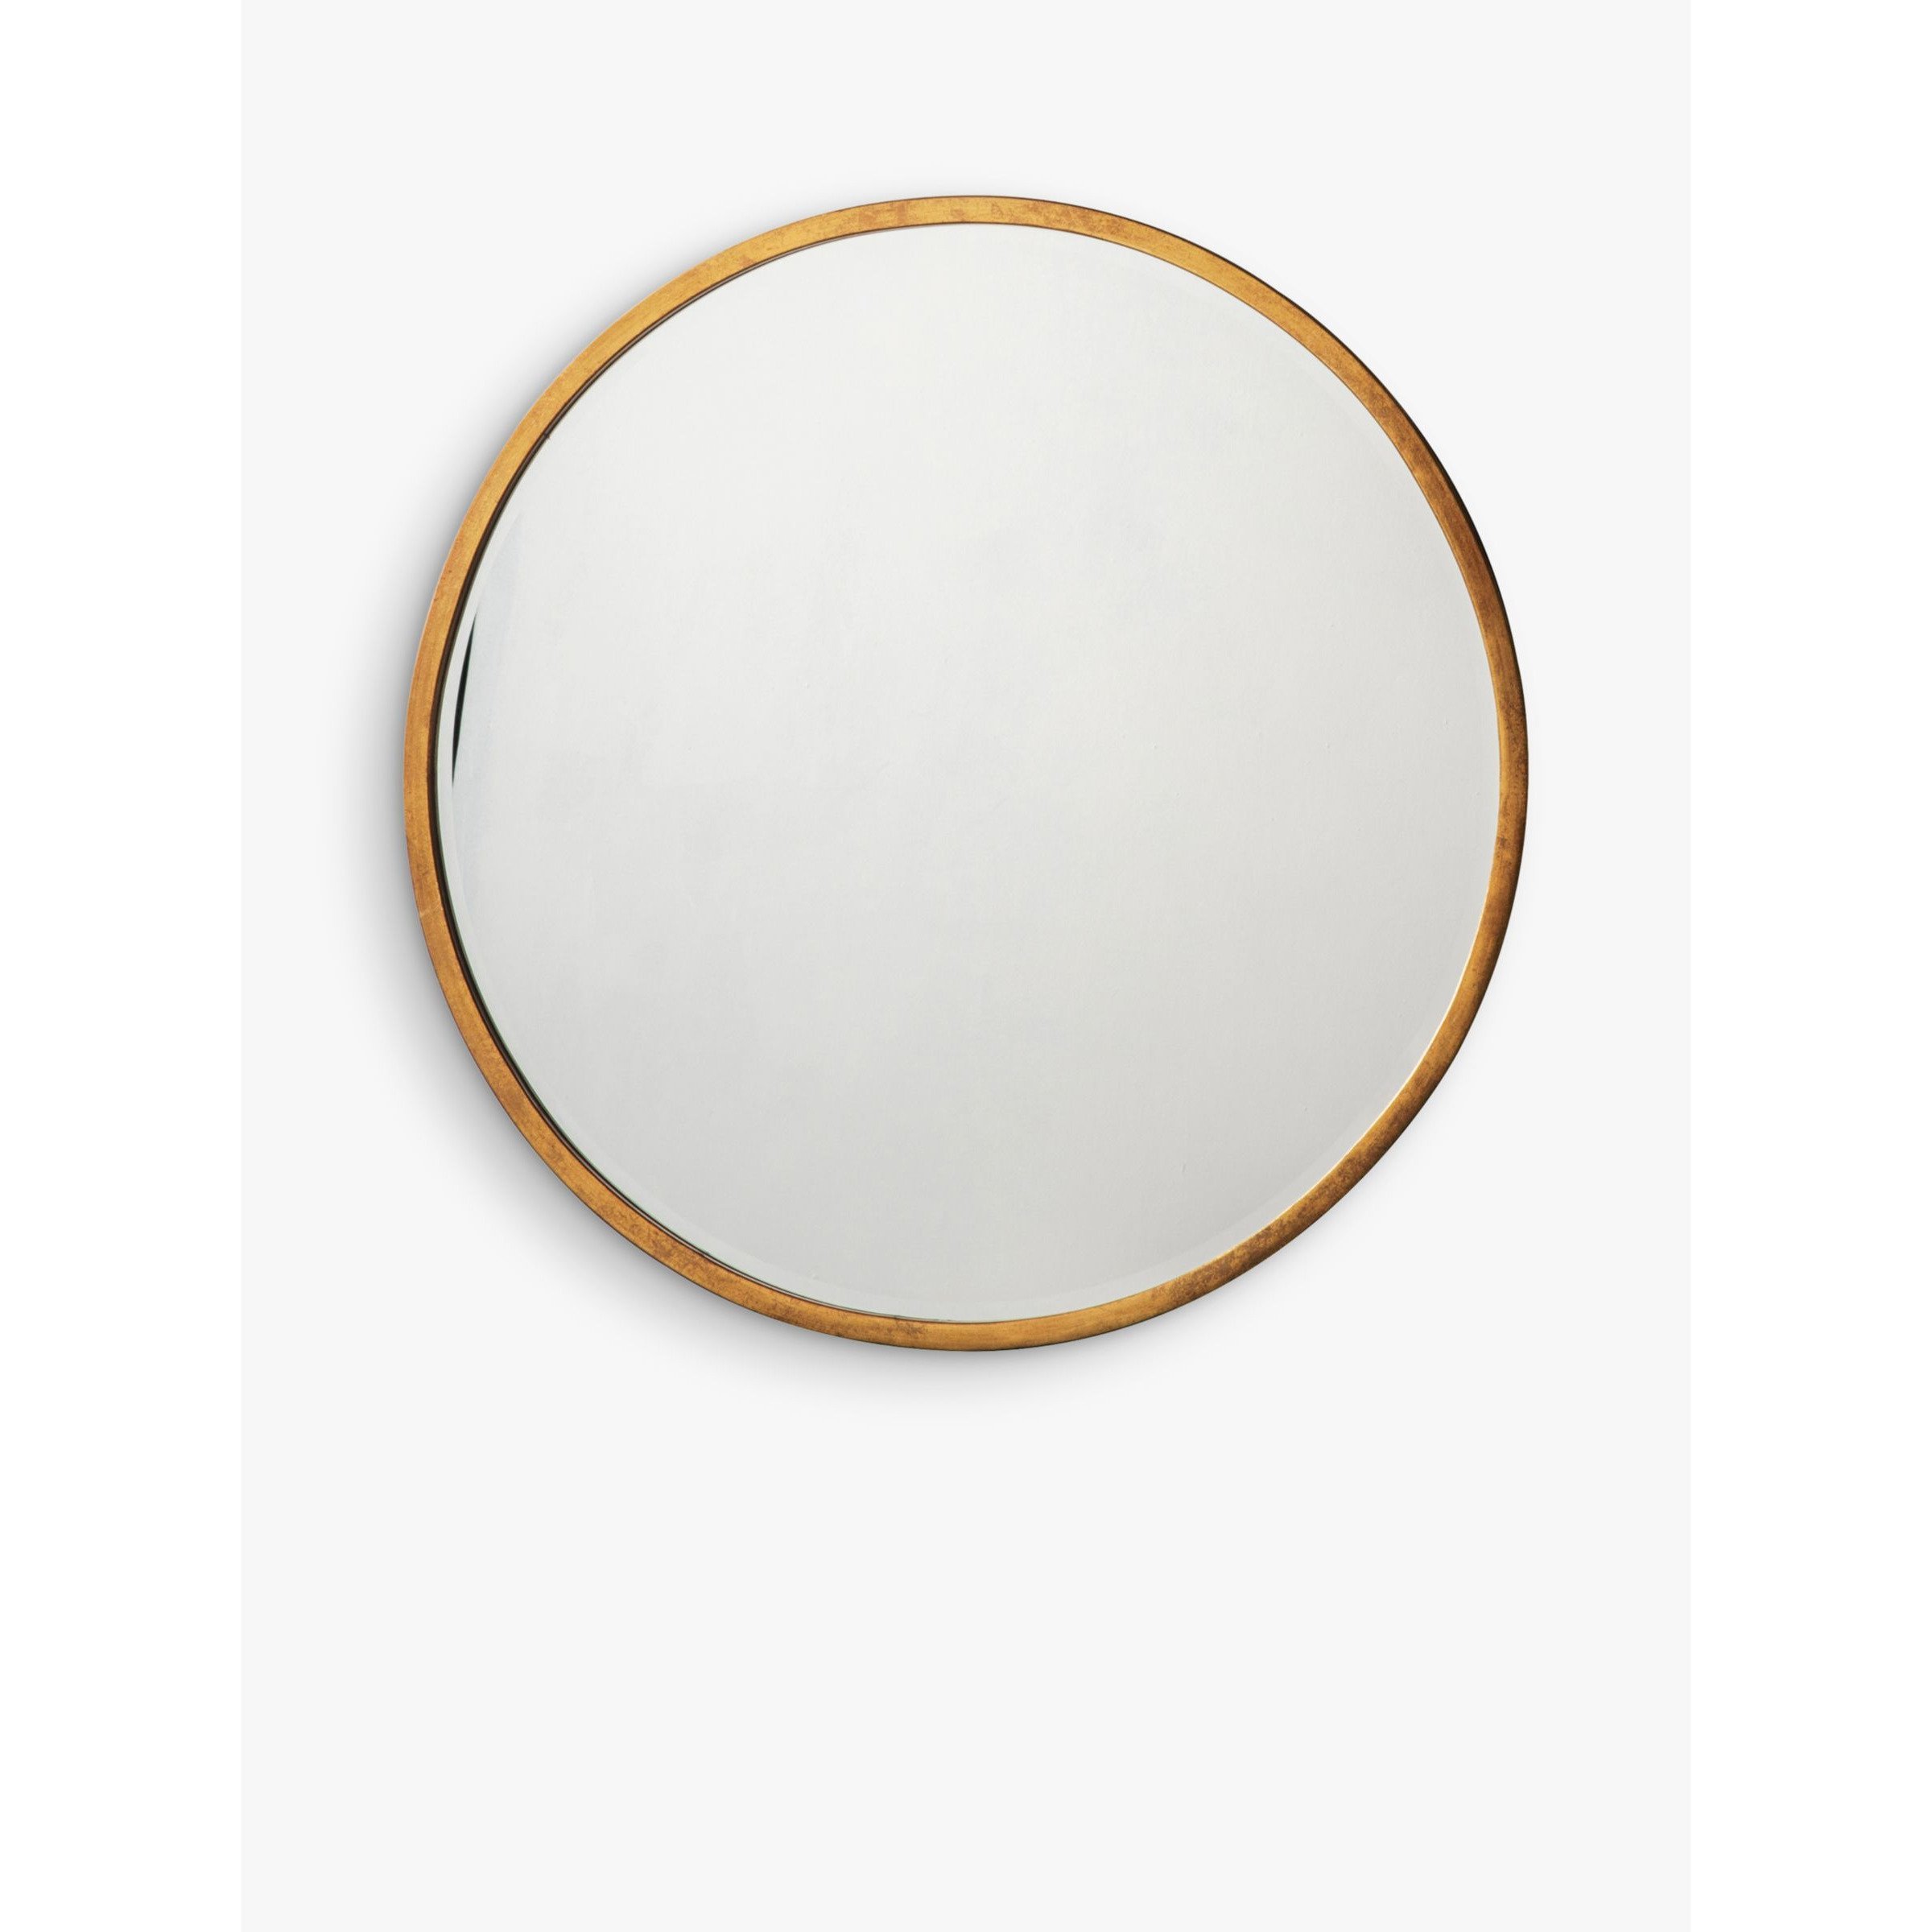 Gallery Direct Cade Round Wall Mirror, 60cm - image 1